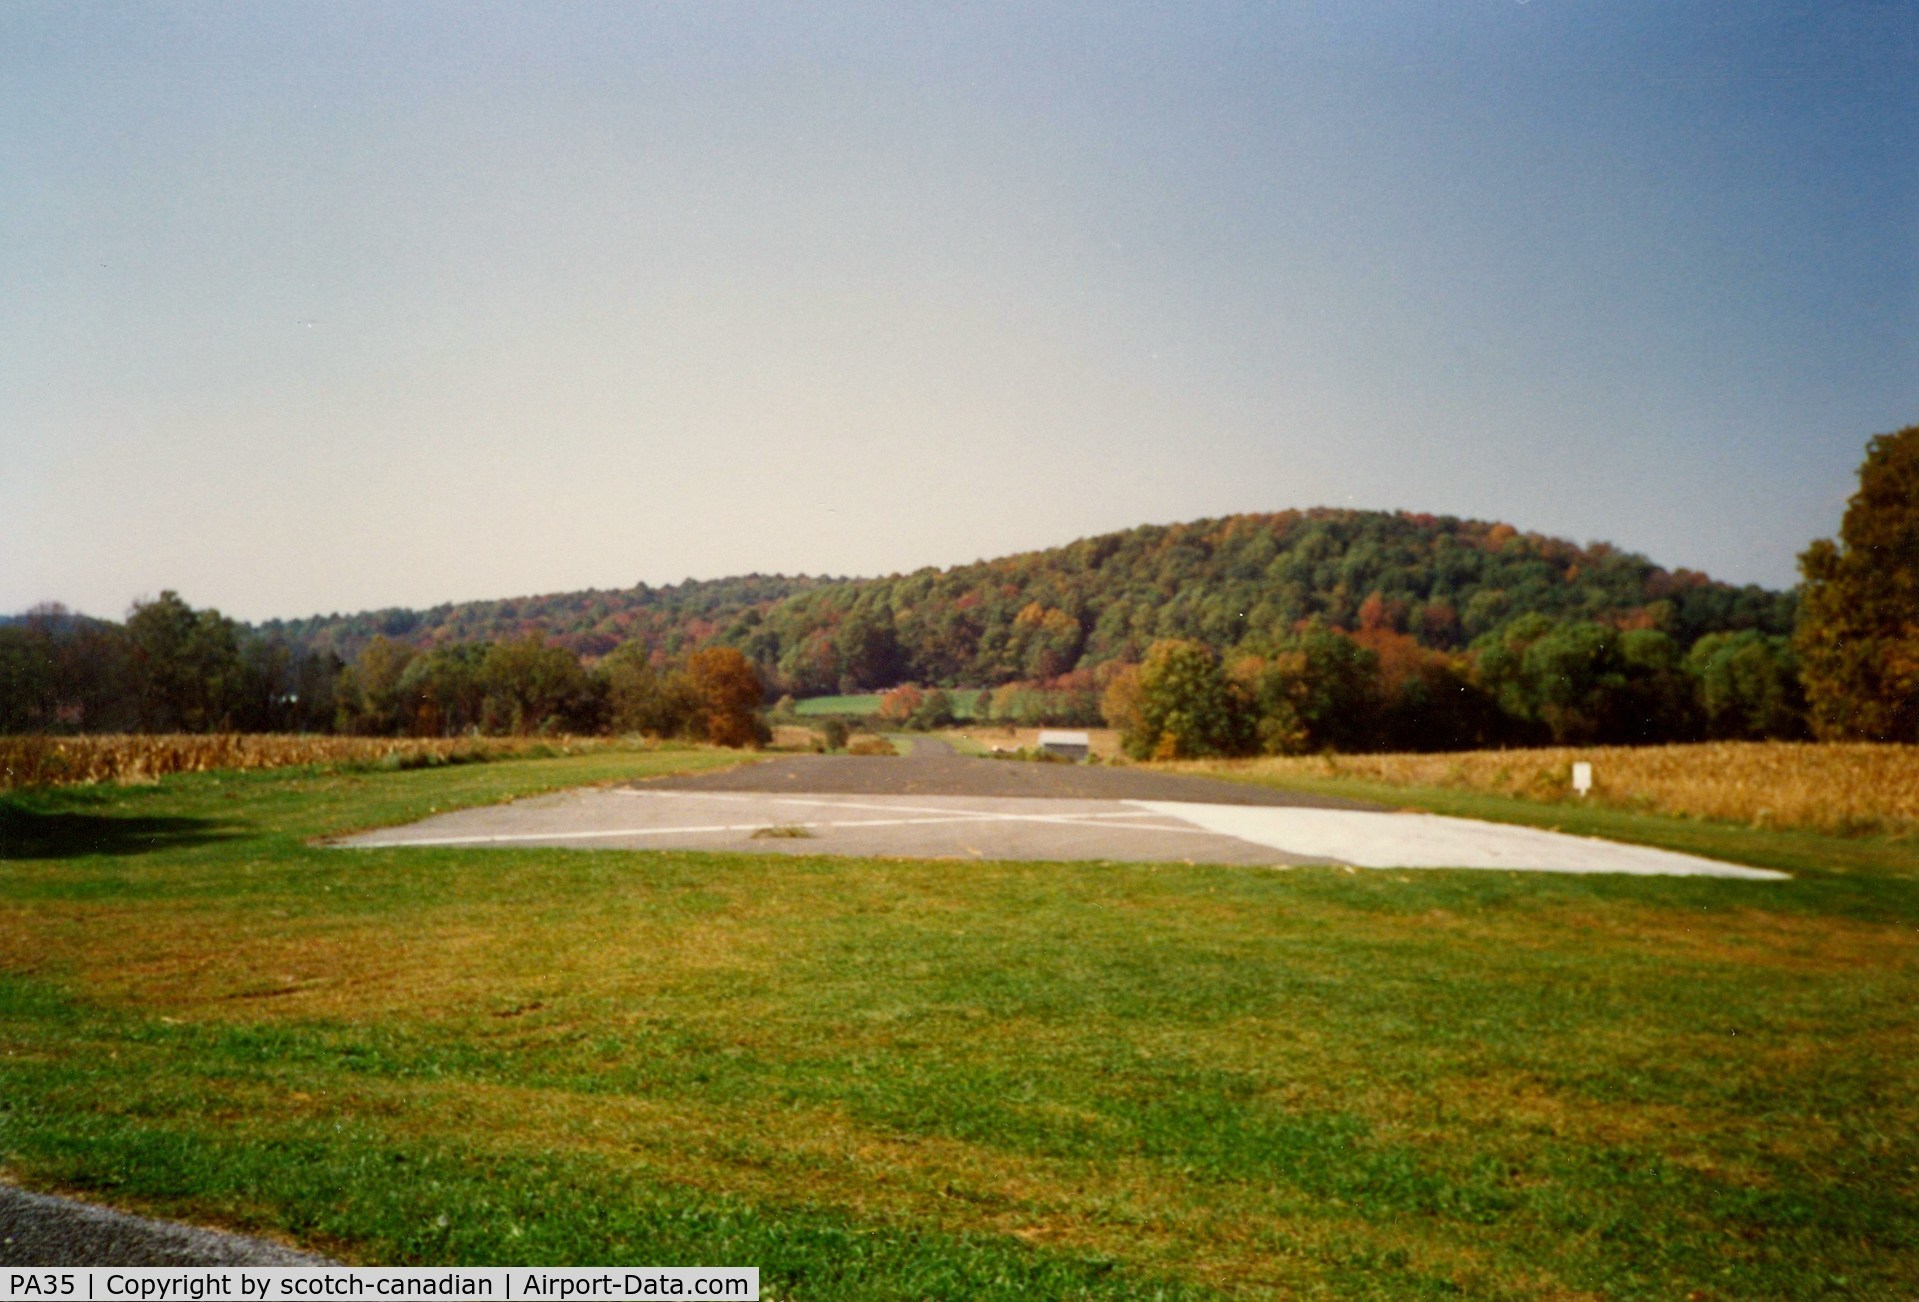 Bally Spring Farm Airport (PA35) - Approach end of Runway 31 at Bally Spring Farm Airport, Bally, PA - October 1991